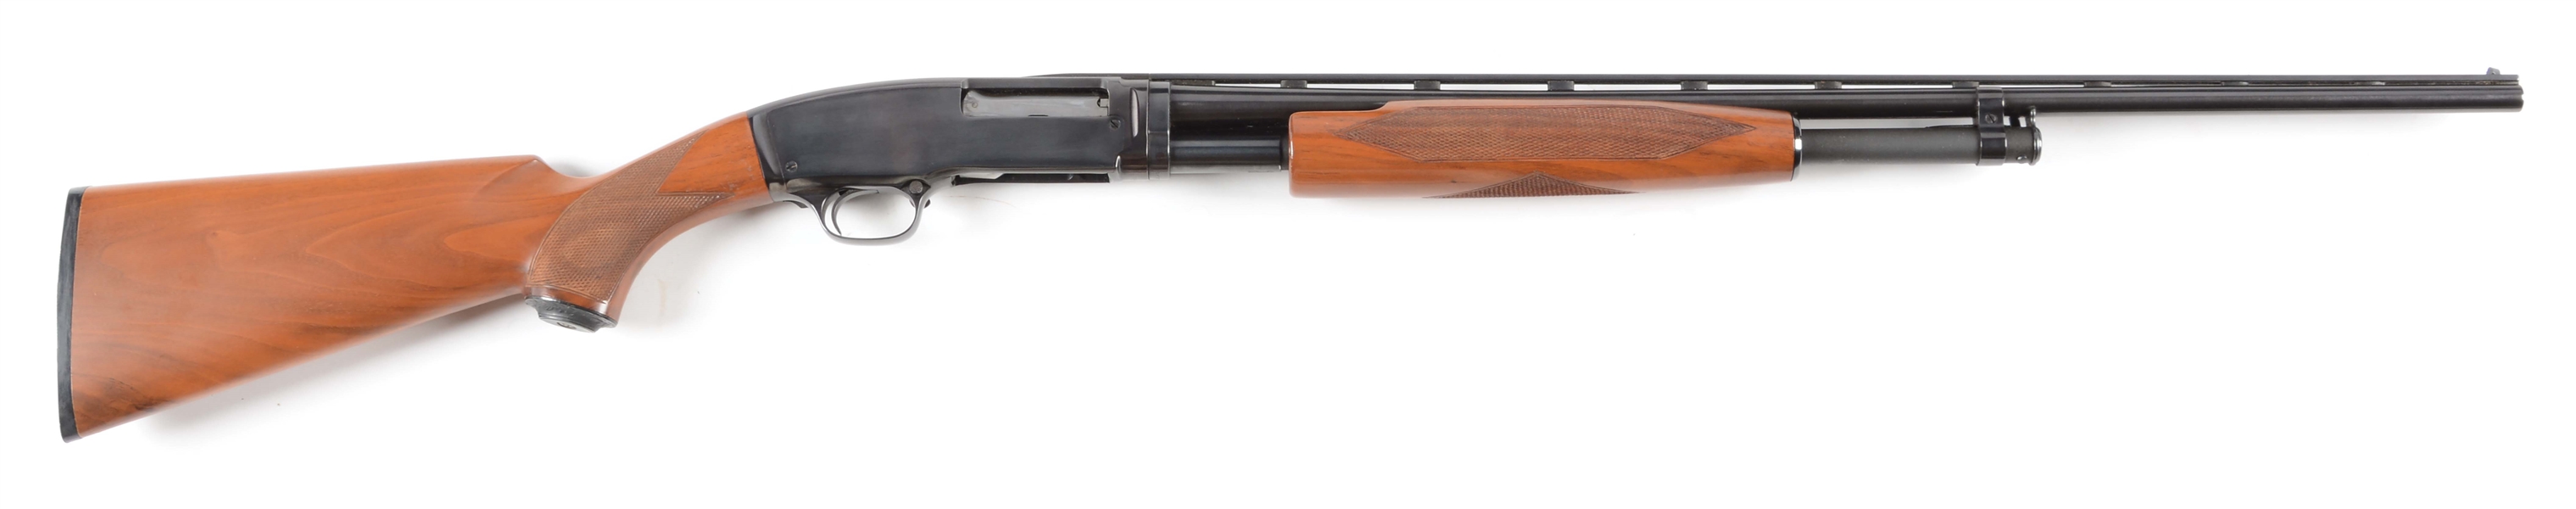 (C) WINCHESTER MODEL 42 "SKEET" PUMP ACTION SHOTGUN WITH SIMMONS VENTILATED RIB 